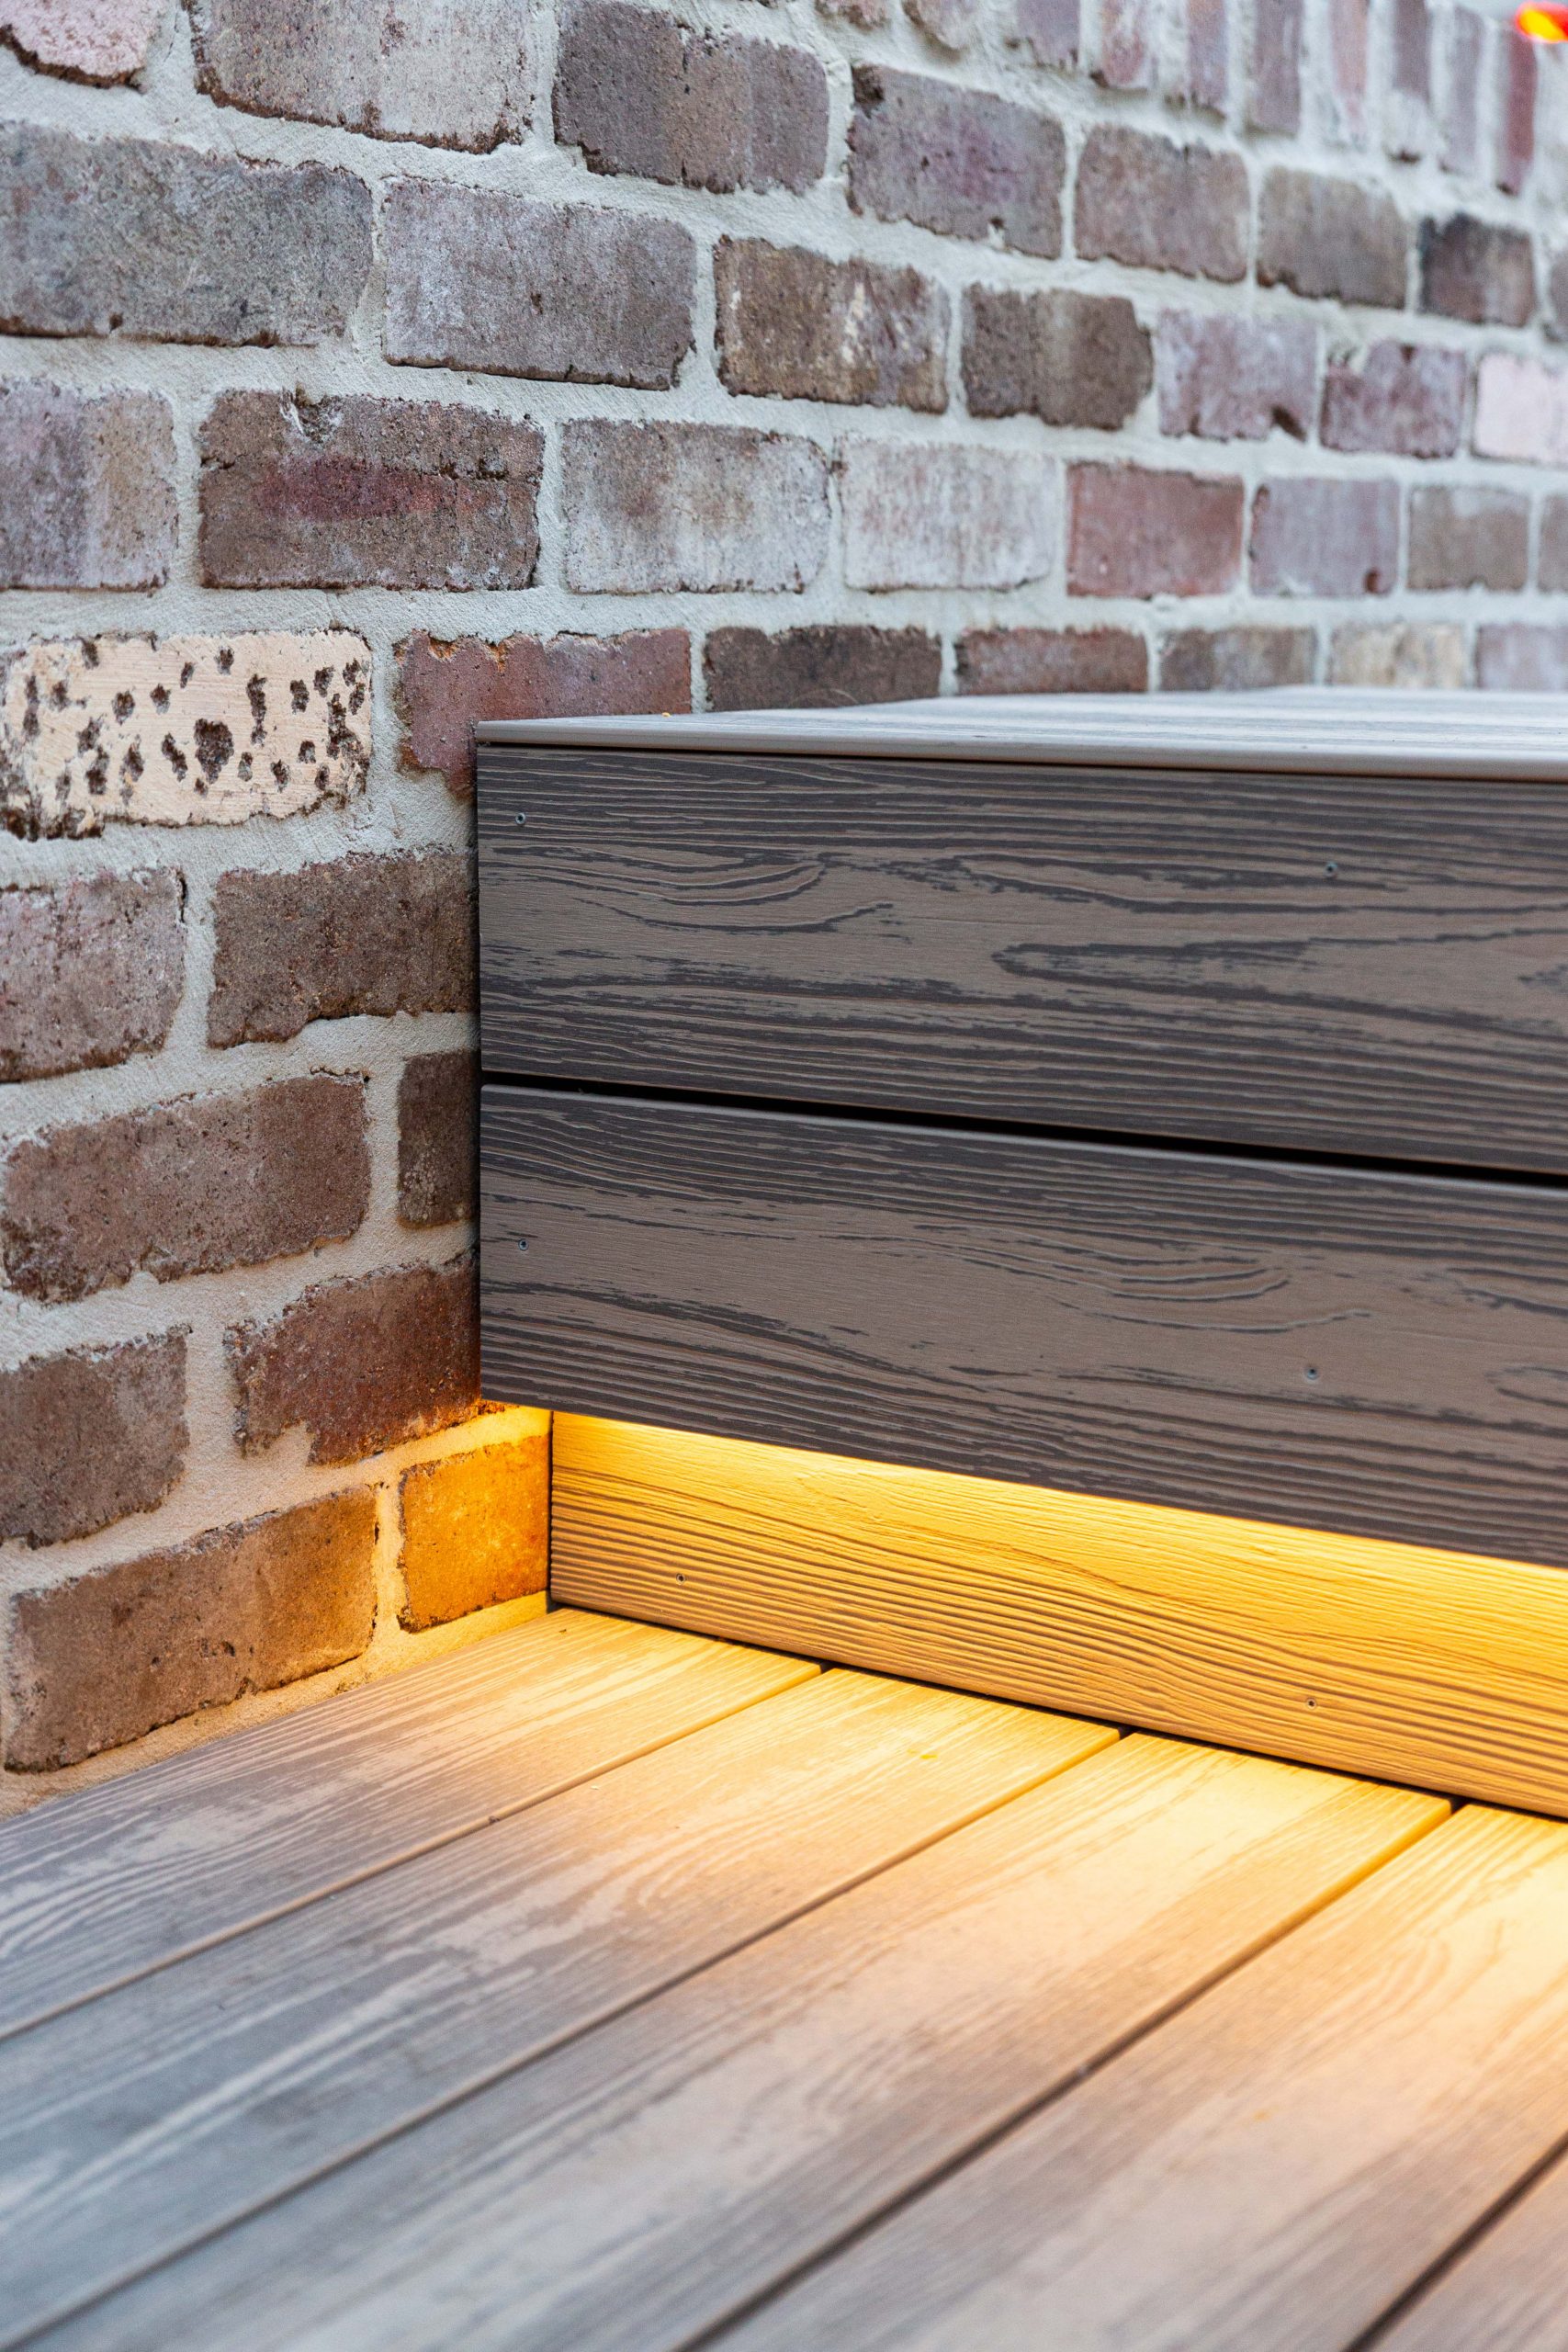 A Brite Composite bench lit from underneath